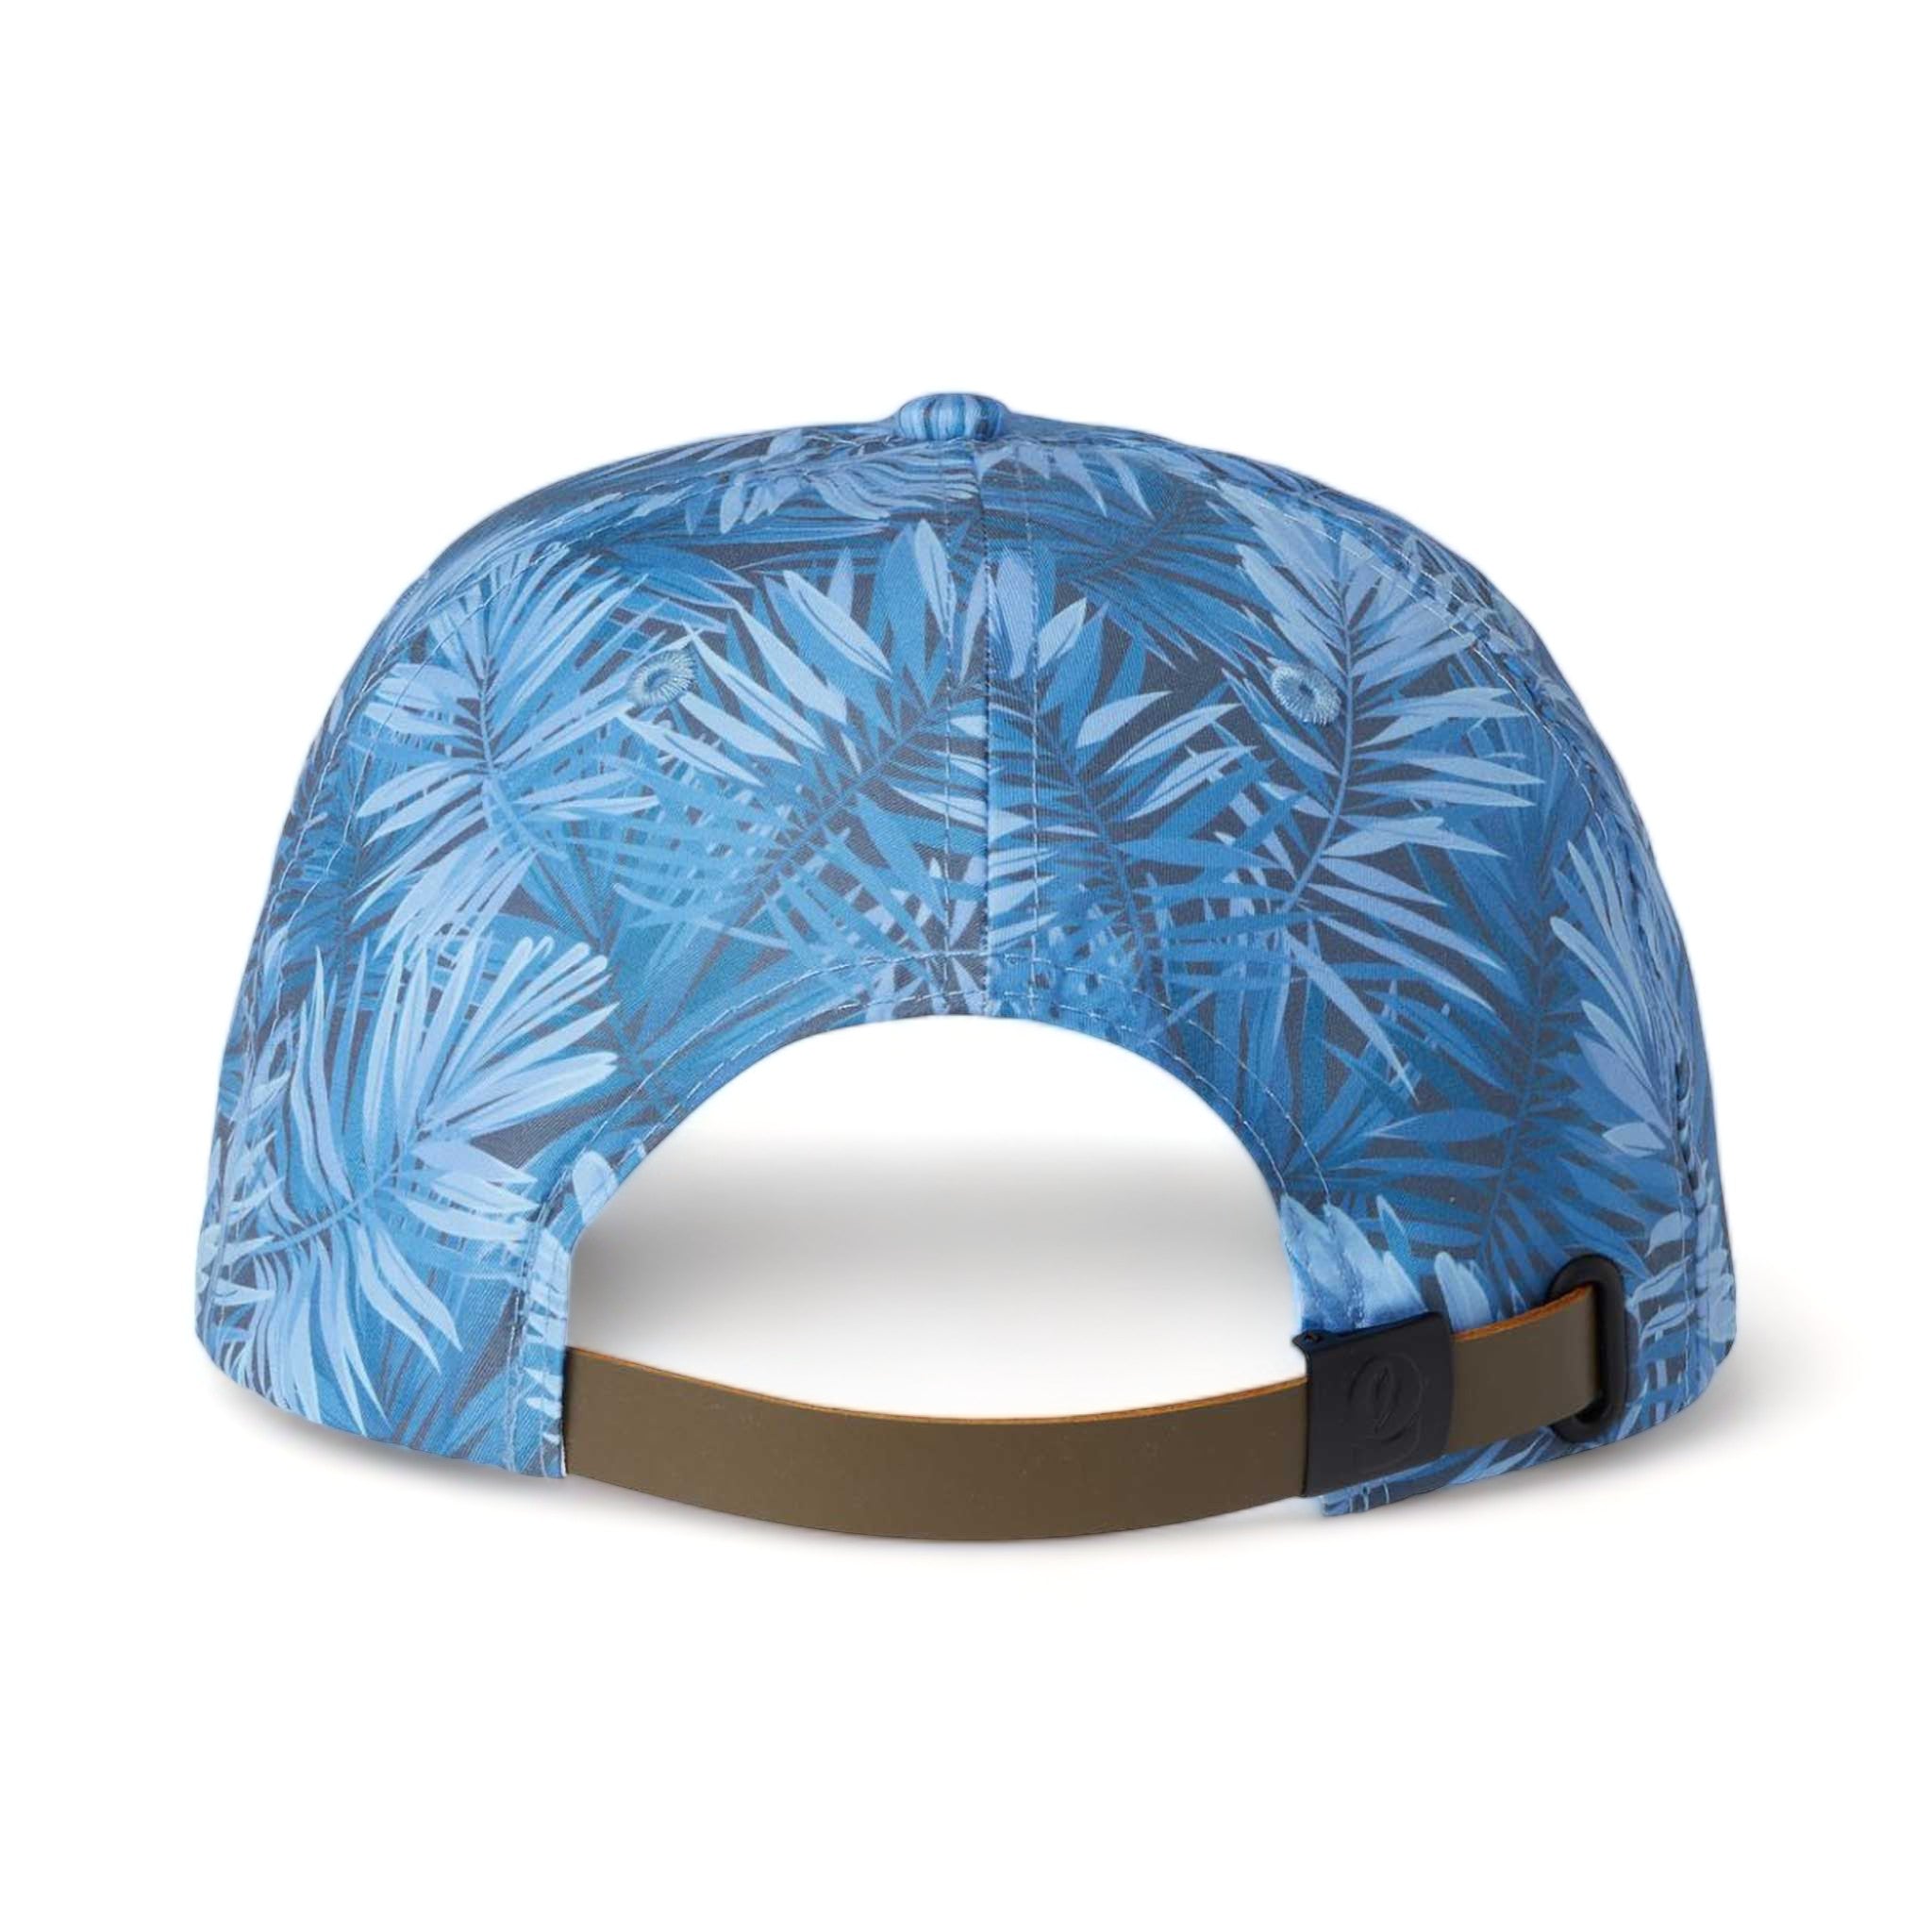 Back view of Imperial DNA010 custom hat in blue hawai'in